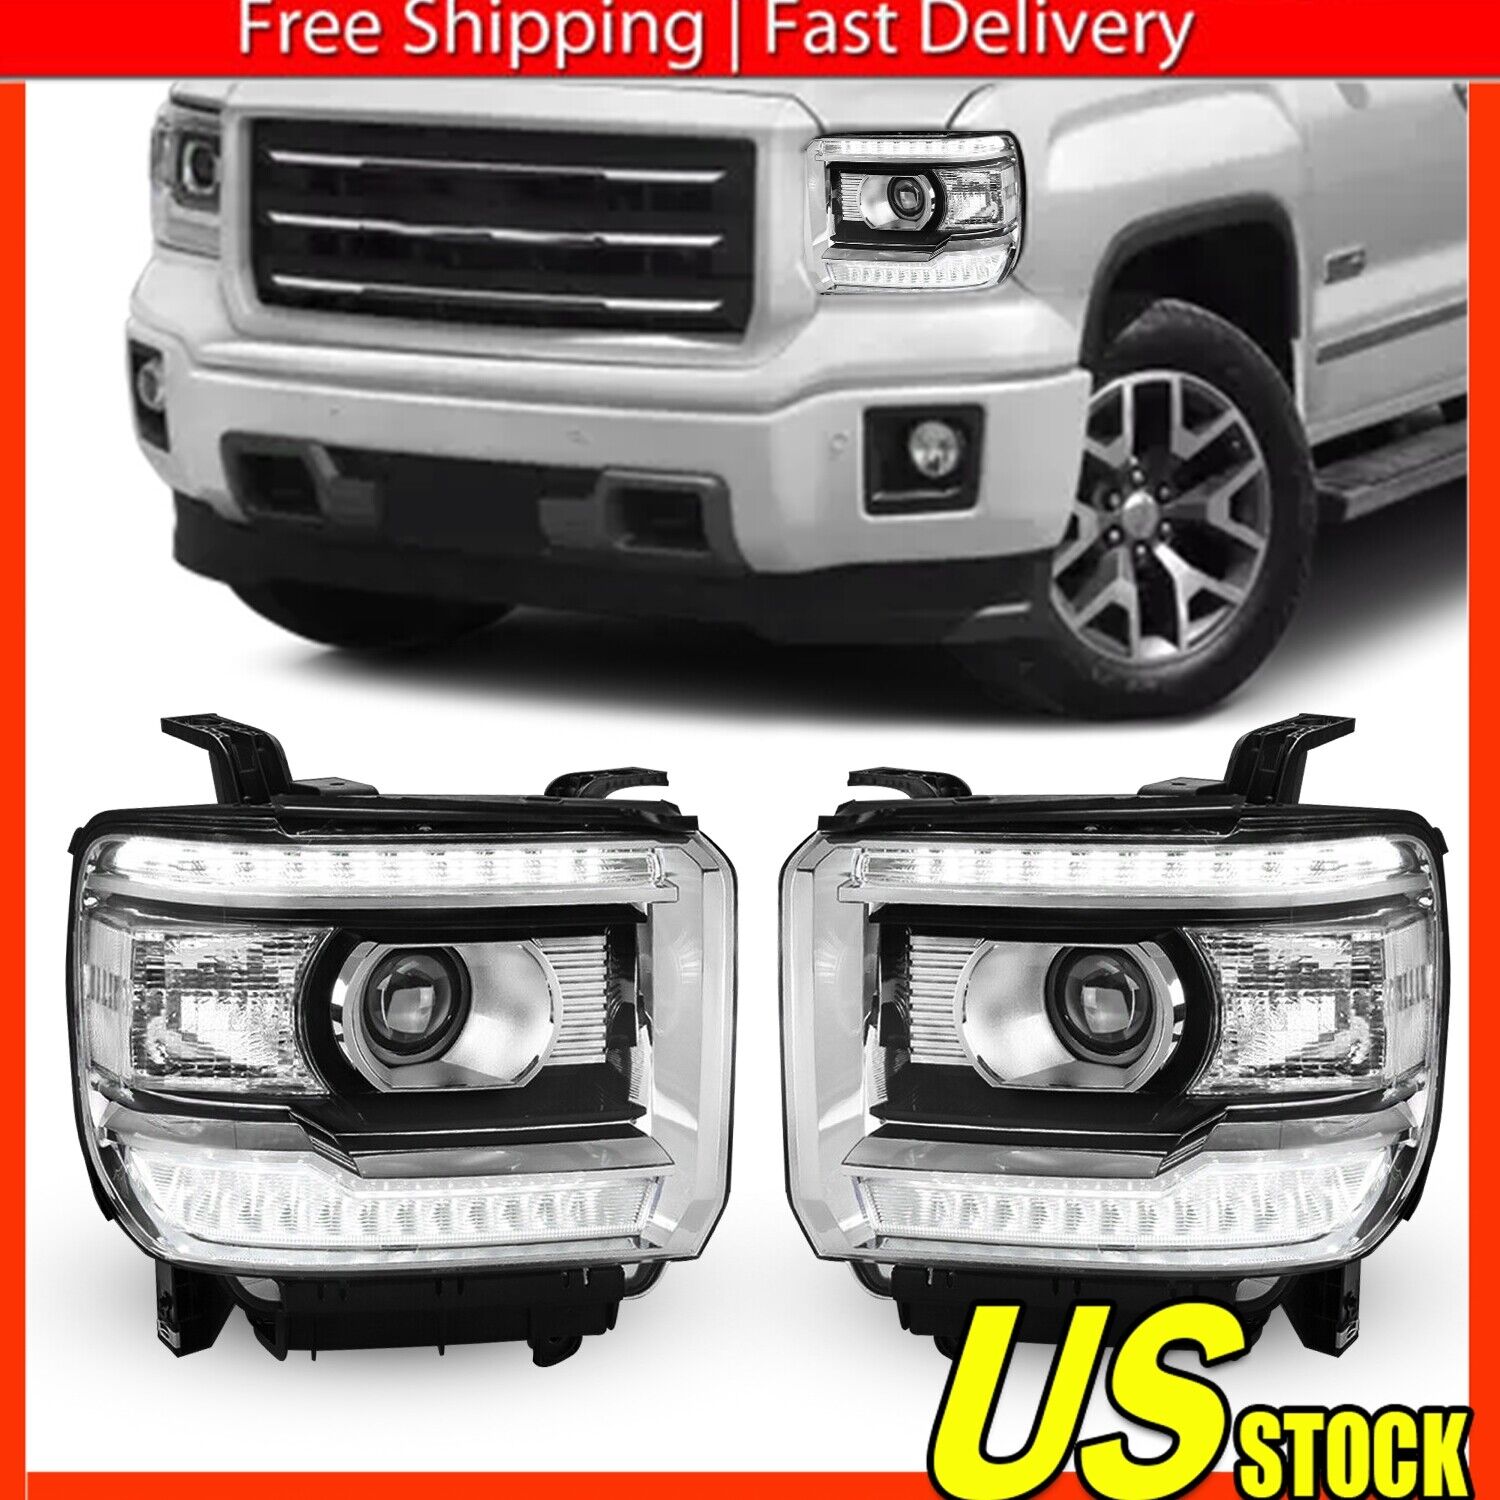 OE Style LED DRL Head Lights Lamps Set For 2014-2018 GMC Sierra 1500 2500 3500